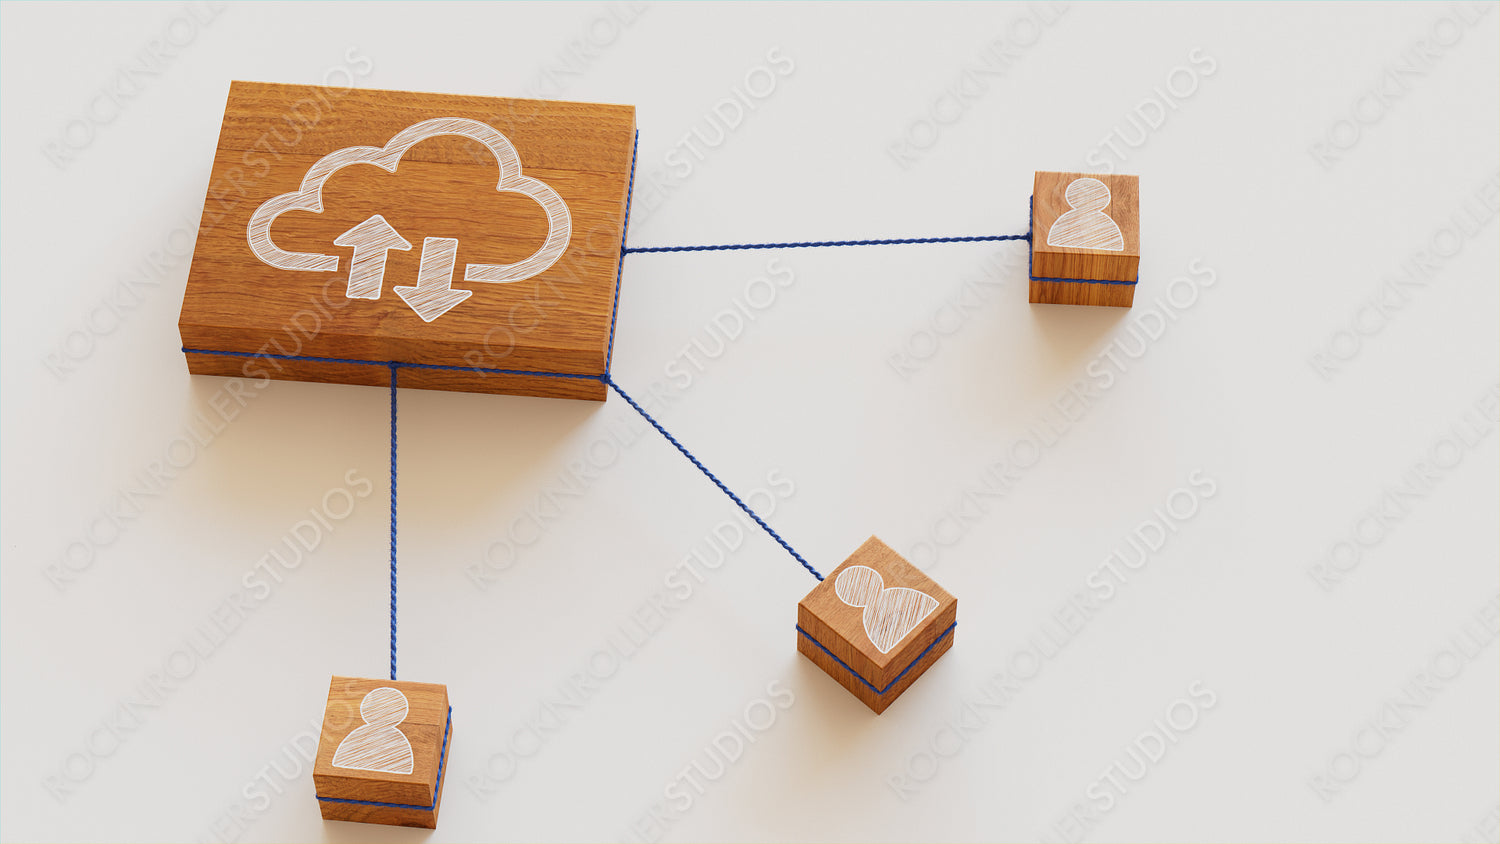 Data storage Technology Concept with cloud Symbol on a Wooden Block. User Network Connections are Represented with Blue string. White background. 3D Render.